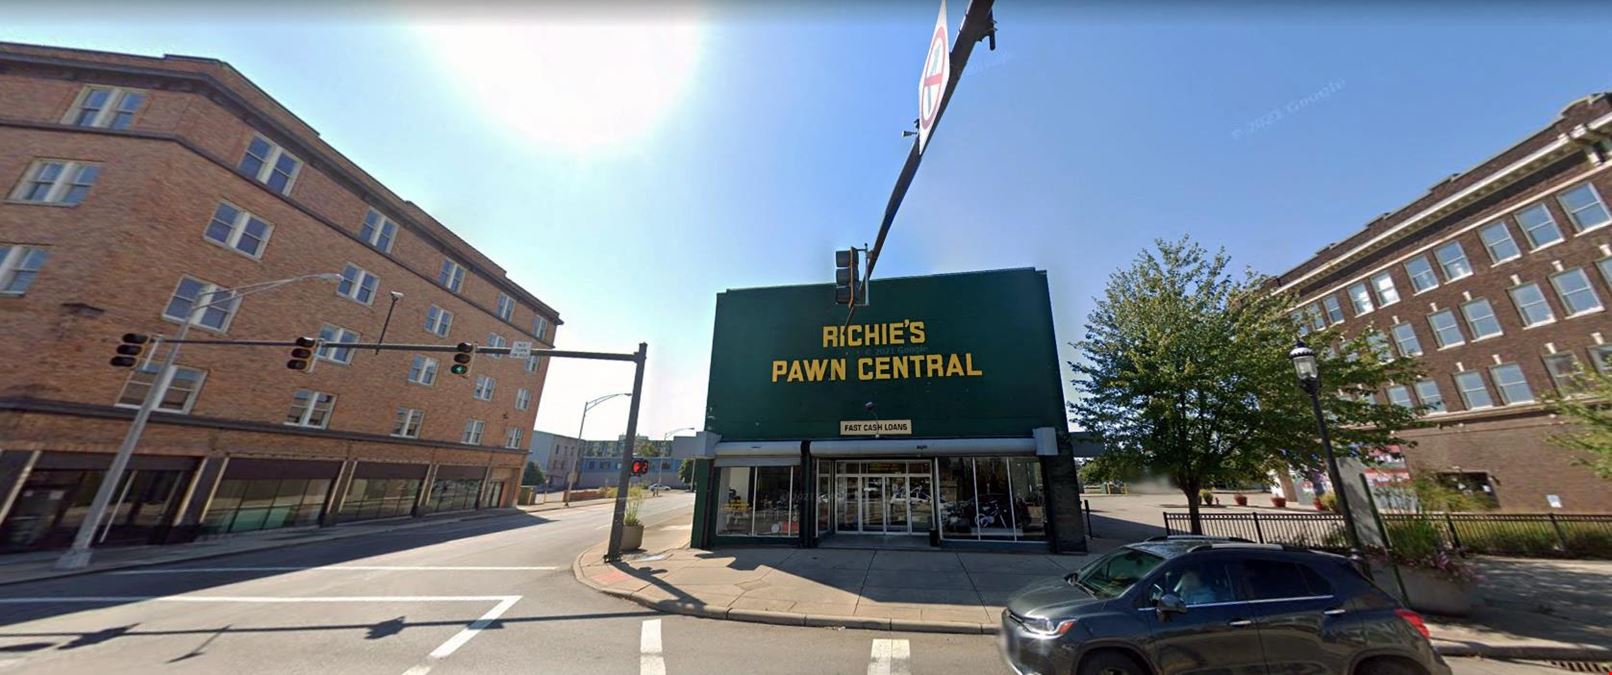 Richie's Pawn Central